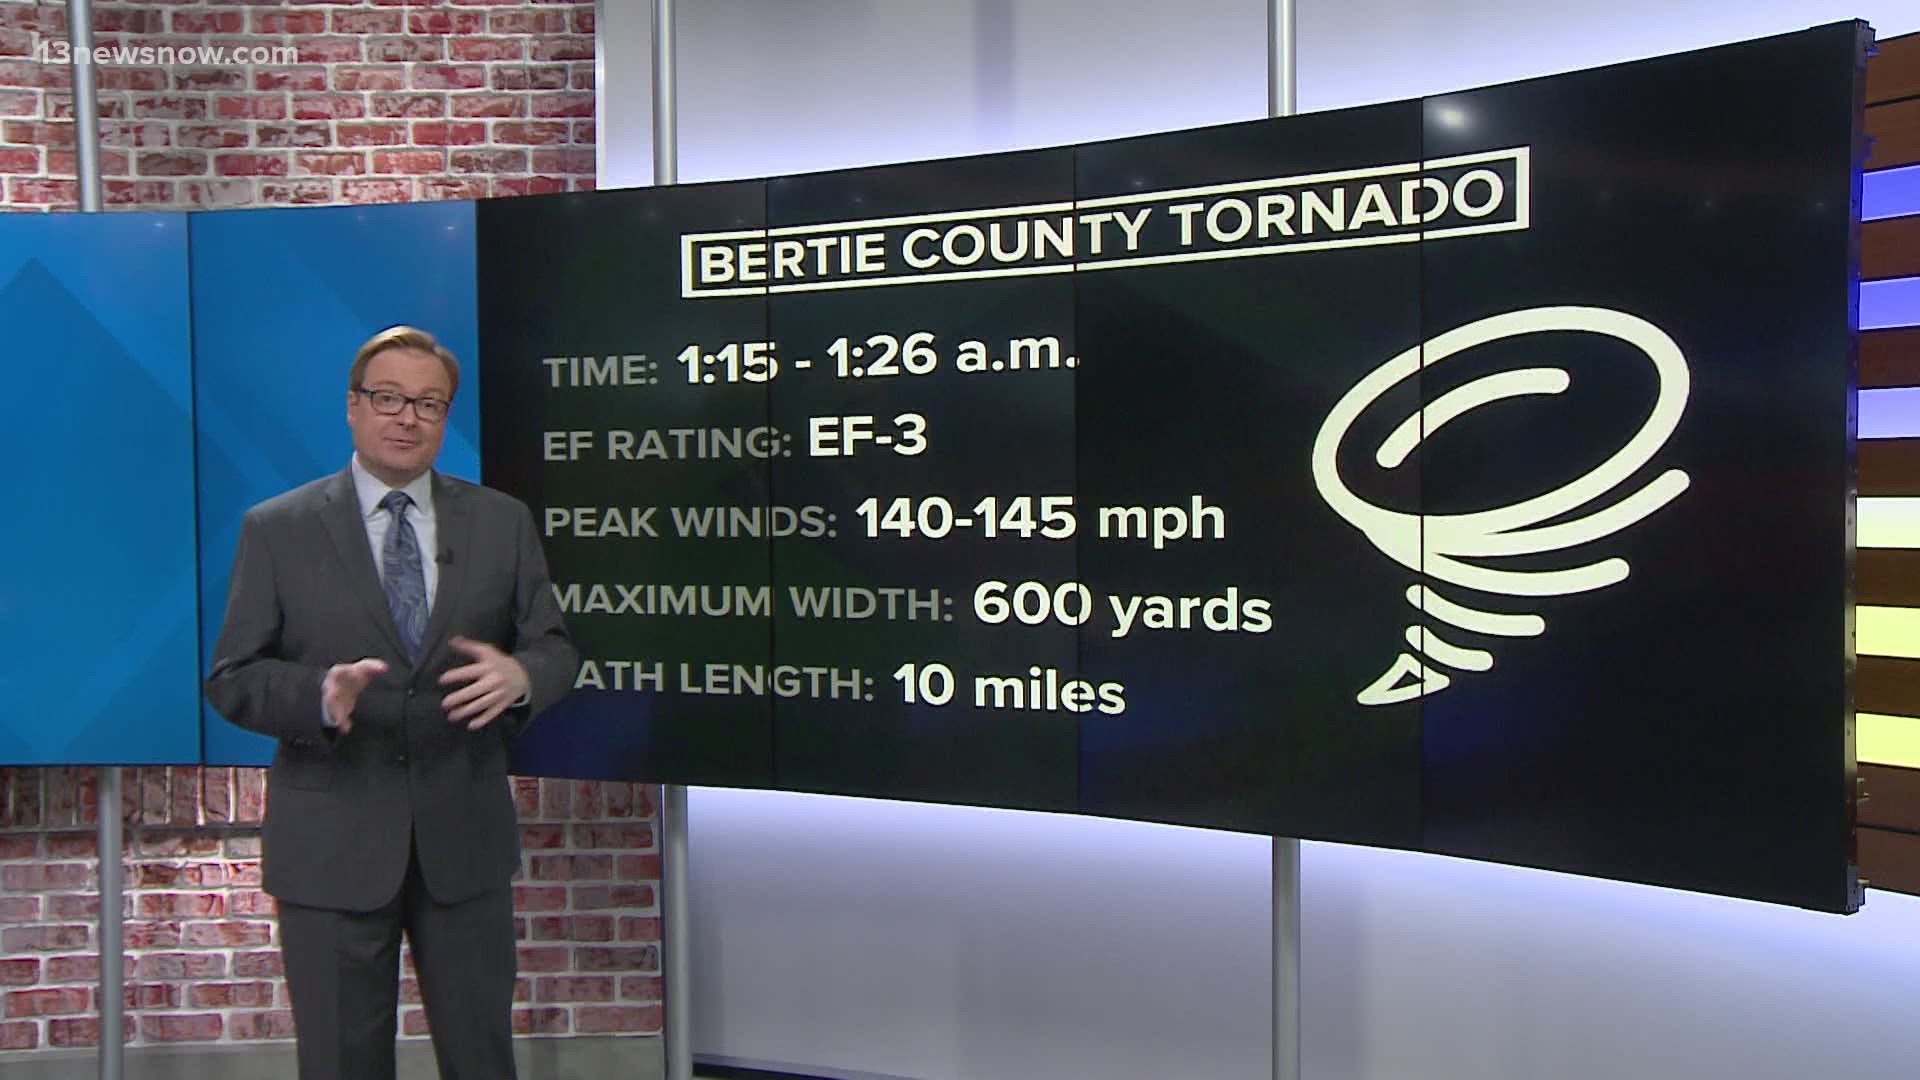 We're learning more about the powerful, deadly tornado that struck Bertie County during Tropical Storm Isaias.